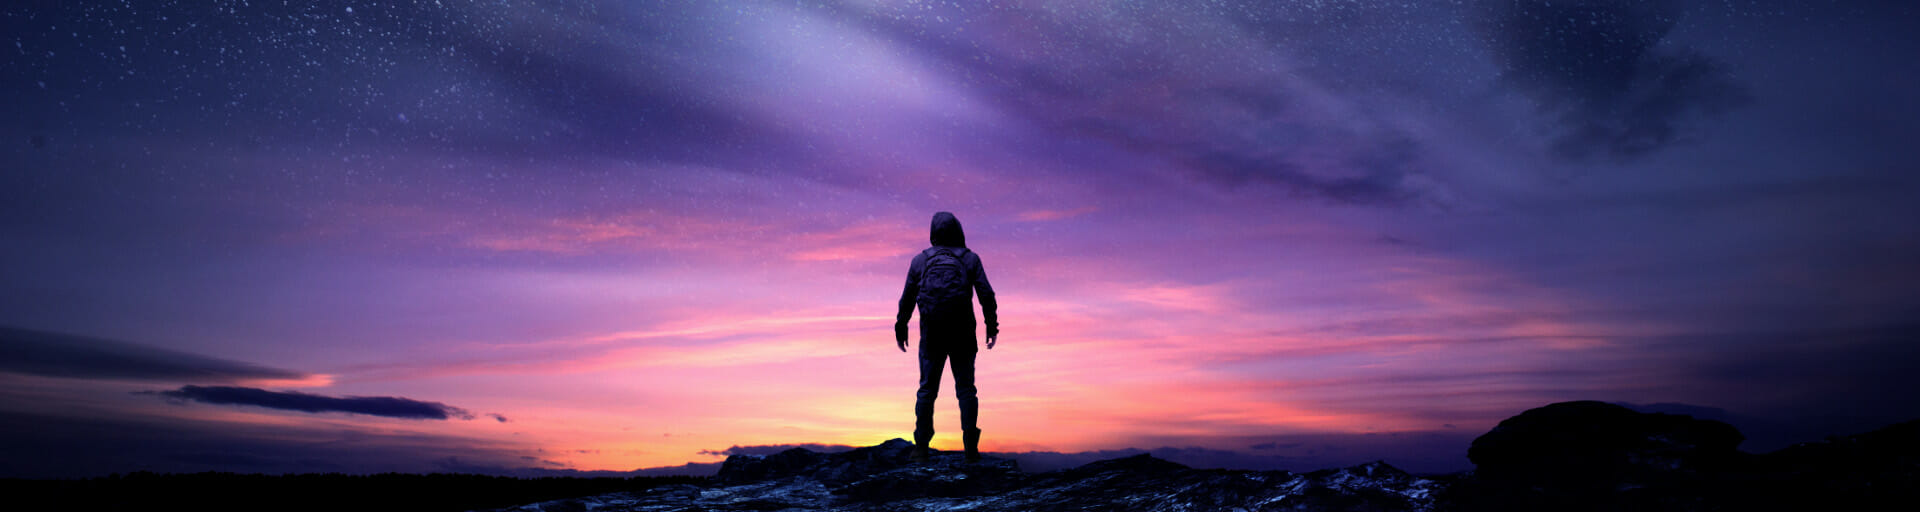 
		A person stands with their back to the camera facing a vibrant orange and purple night sky with some stars barely visible at the top of the frame.		